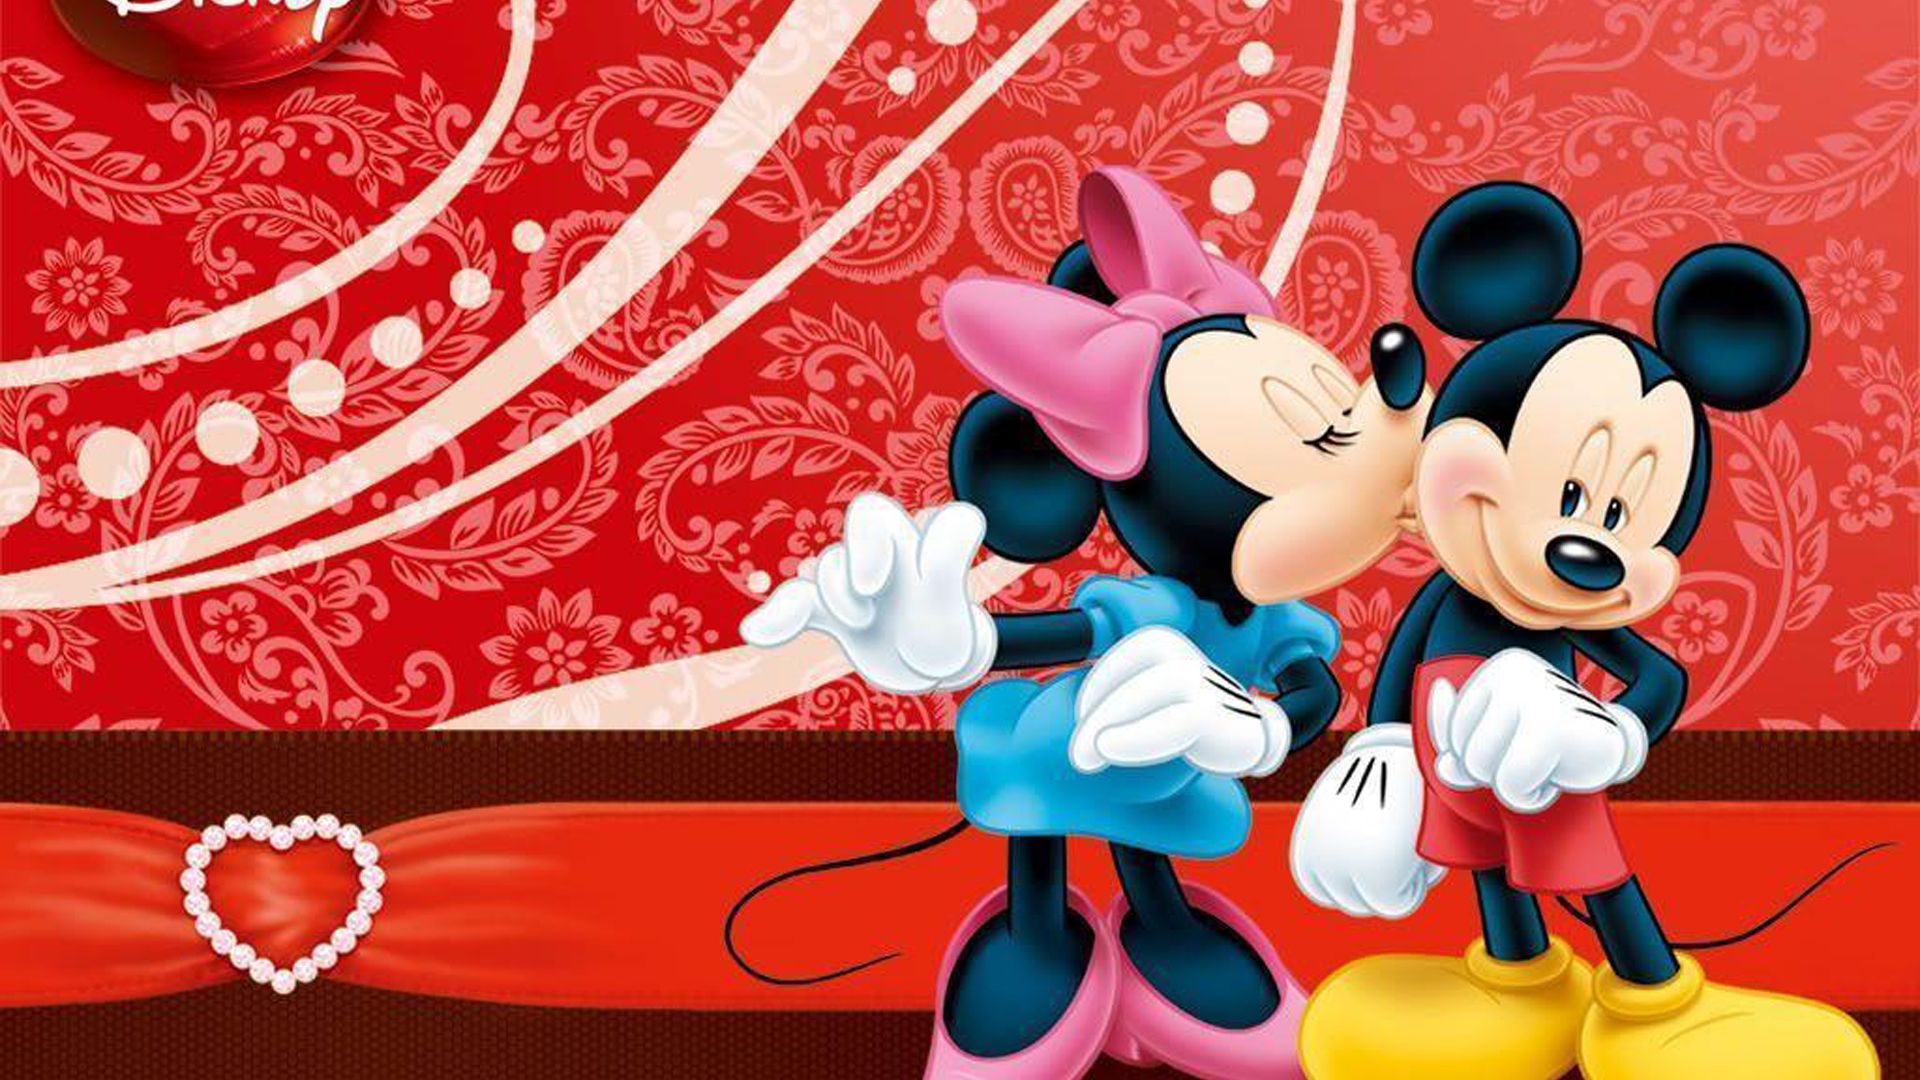  Minnie Mouse Hintergrundbild 1920x1080. Cute Minnie Mouse And Mickey Mouse HD Minnie Mouse Wallpaper